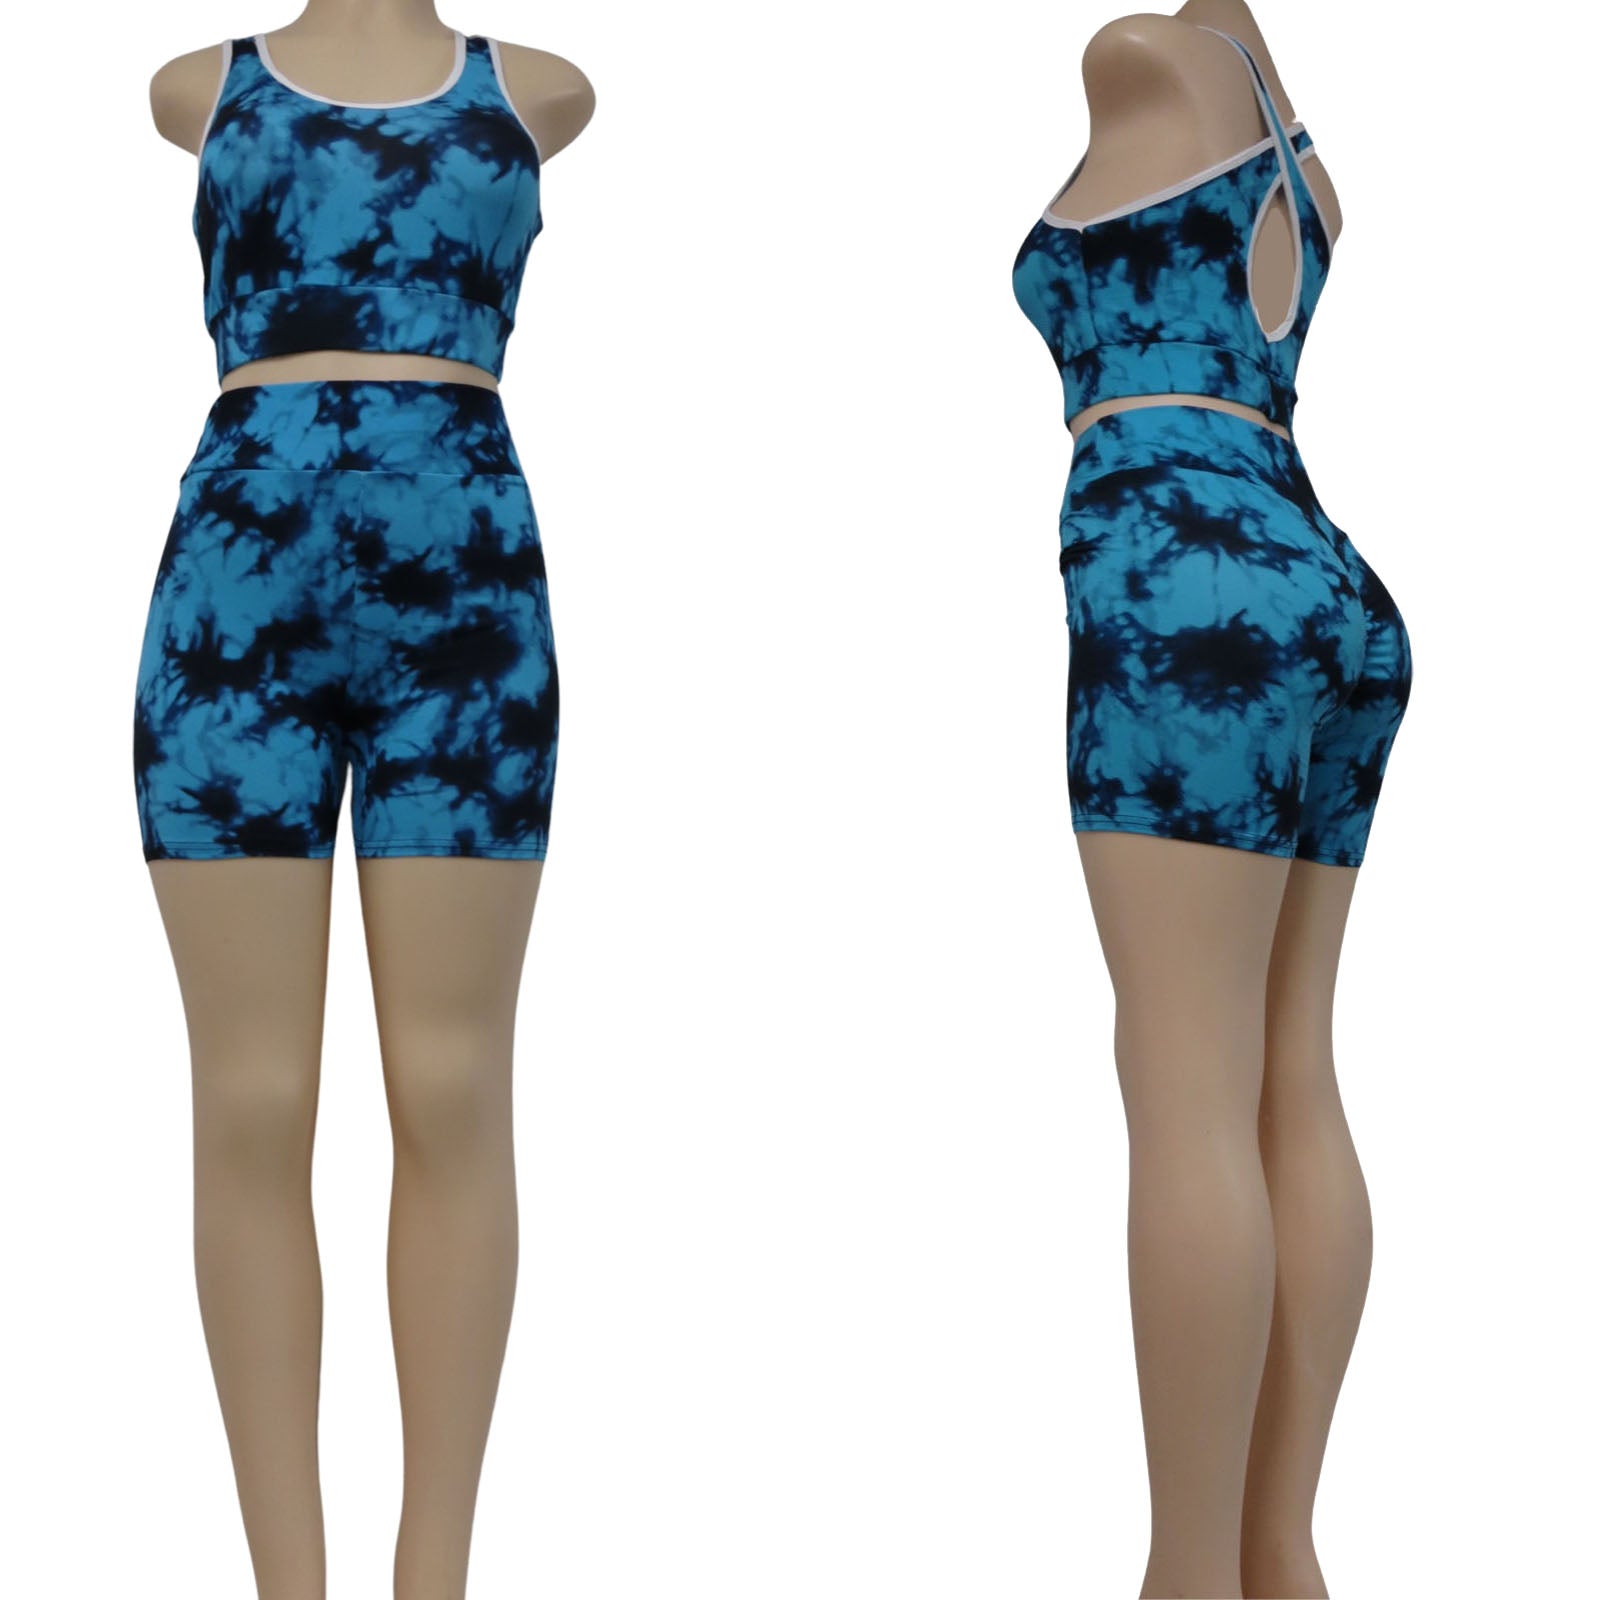 wholesale tie dye anti cellulite shorts set with racerback top in blue and black color mix